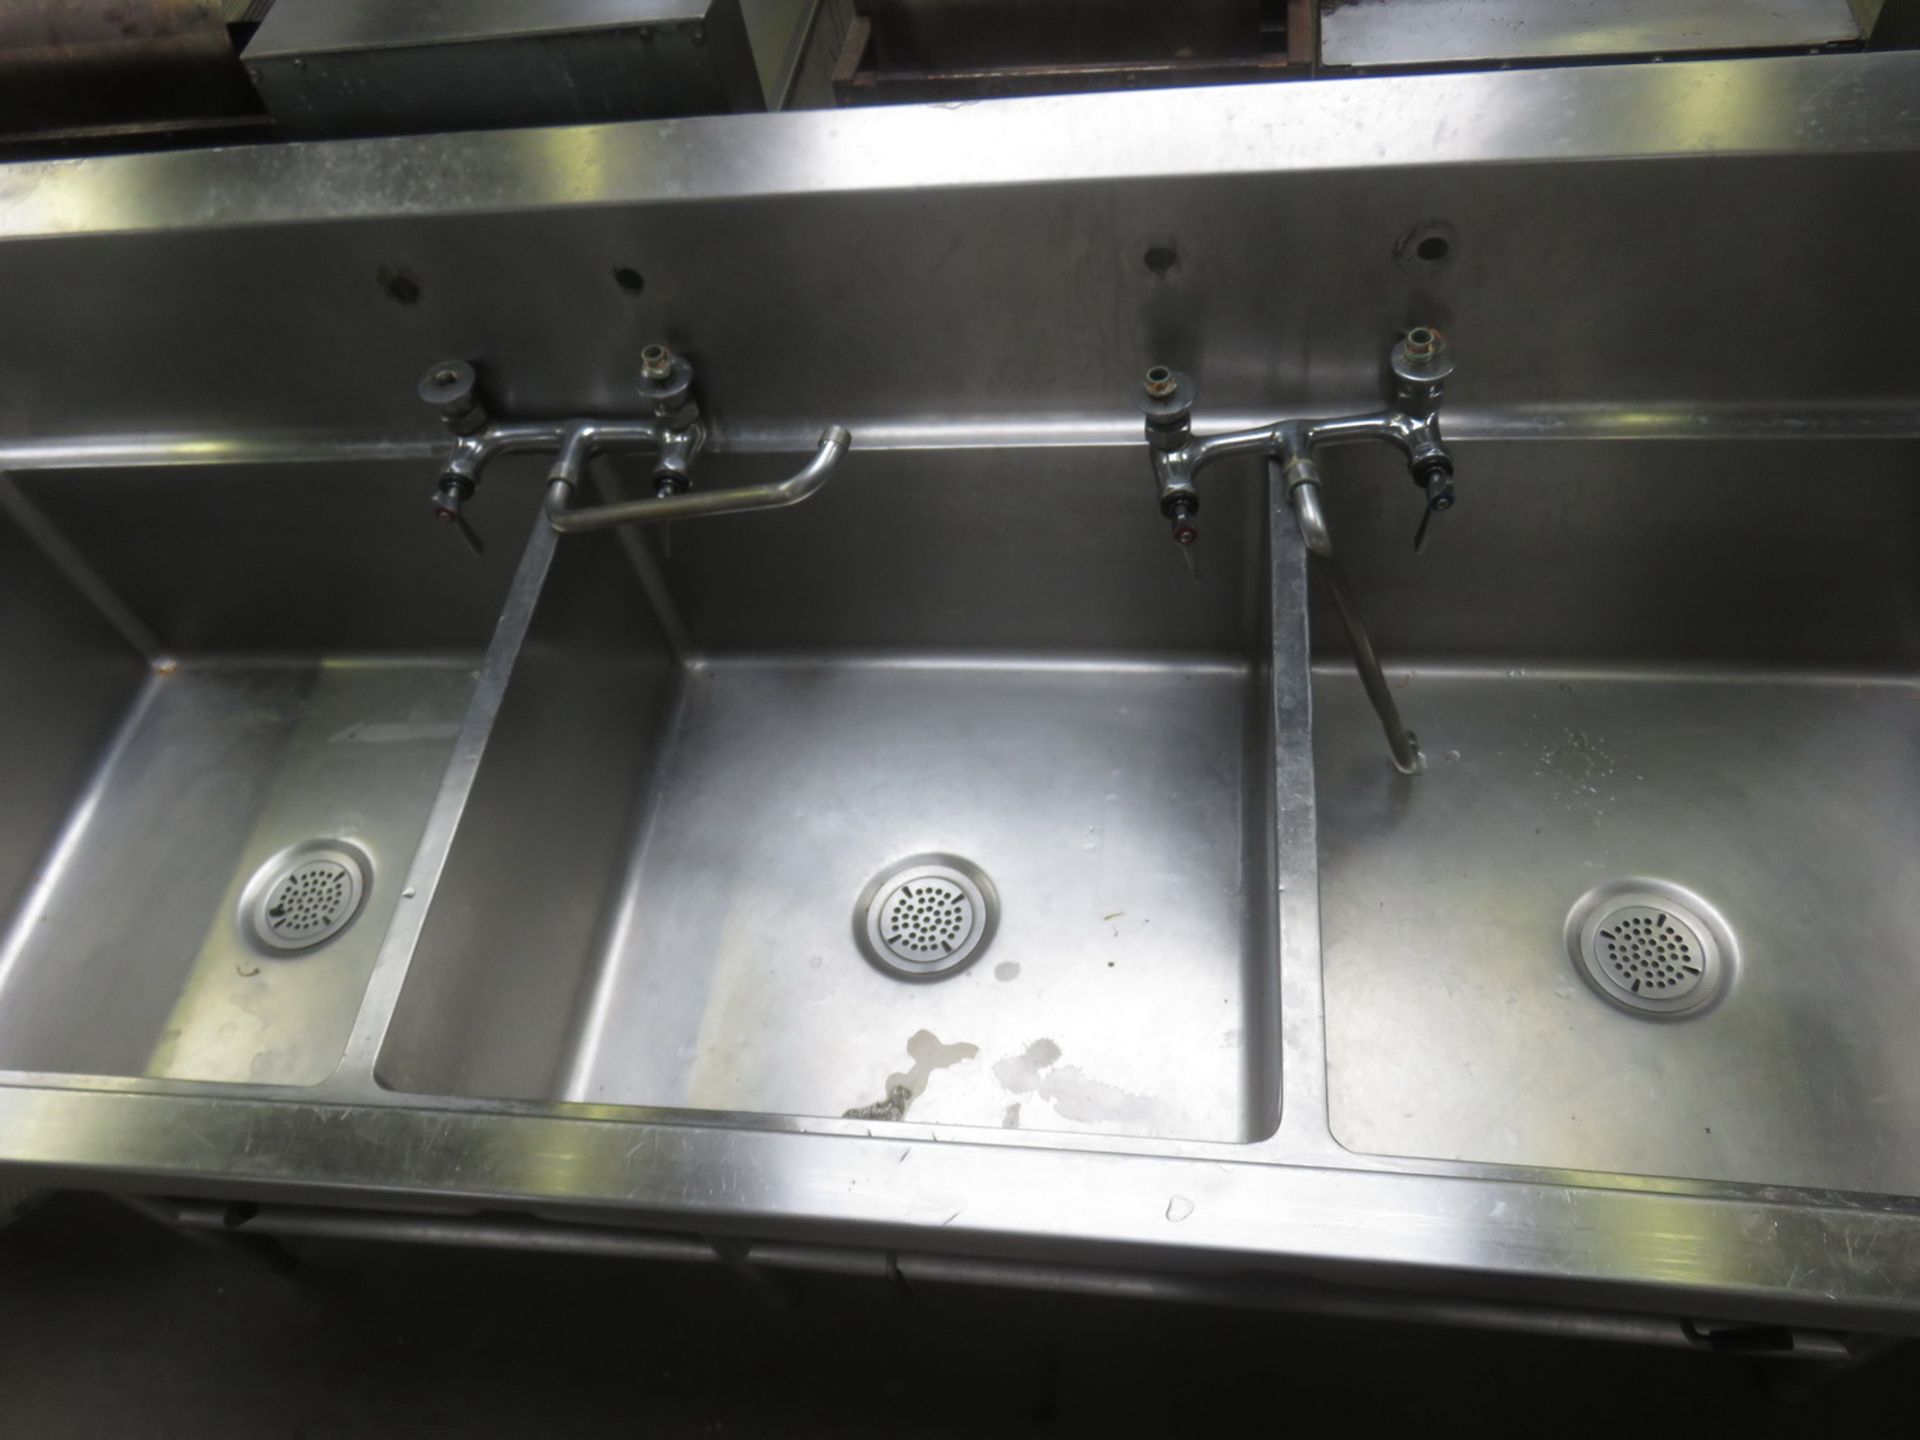 GENERAL S/S 31" X 126" 3-COMPARTMENT SINK W/ TAPS - Image 2 of 2